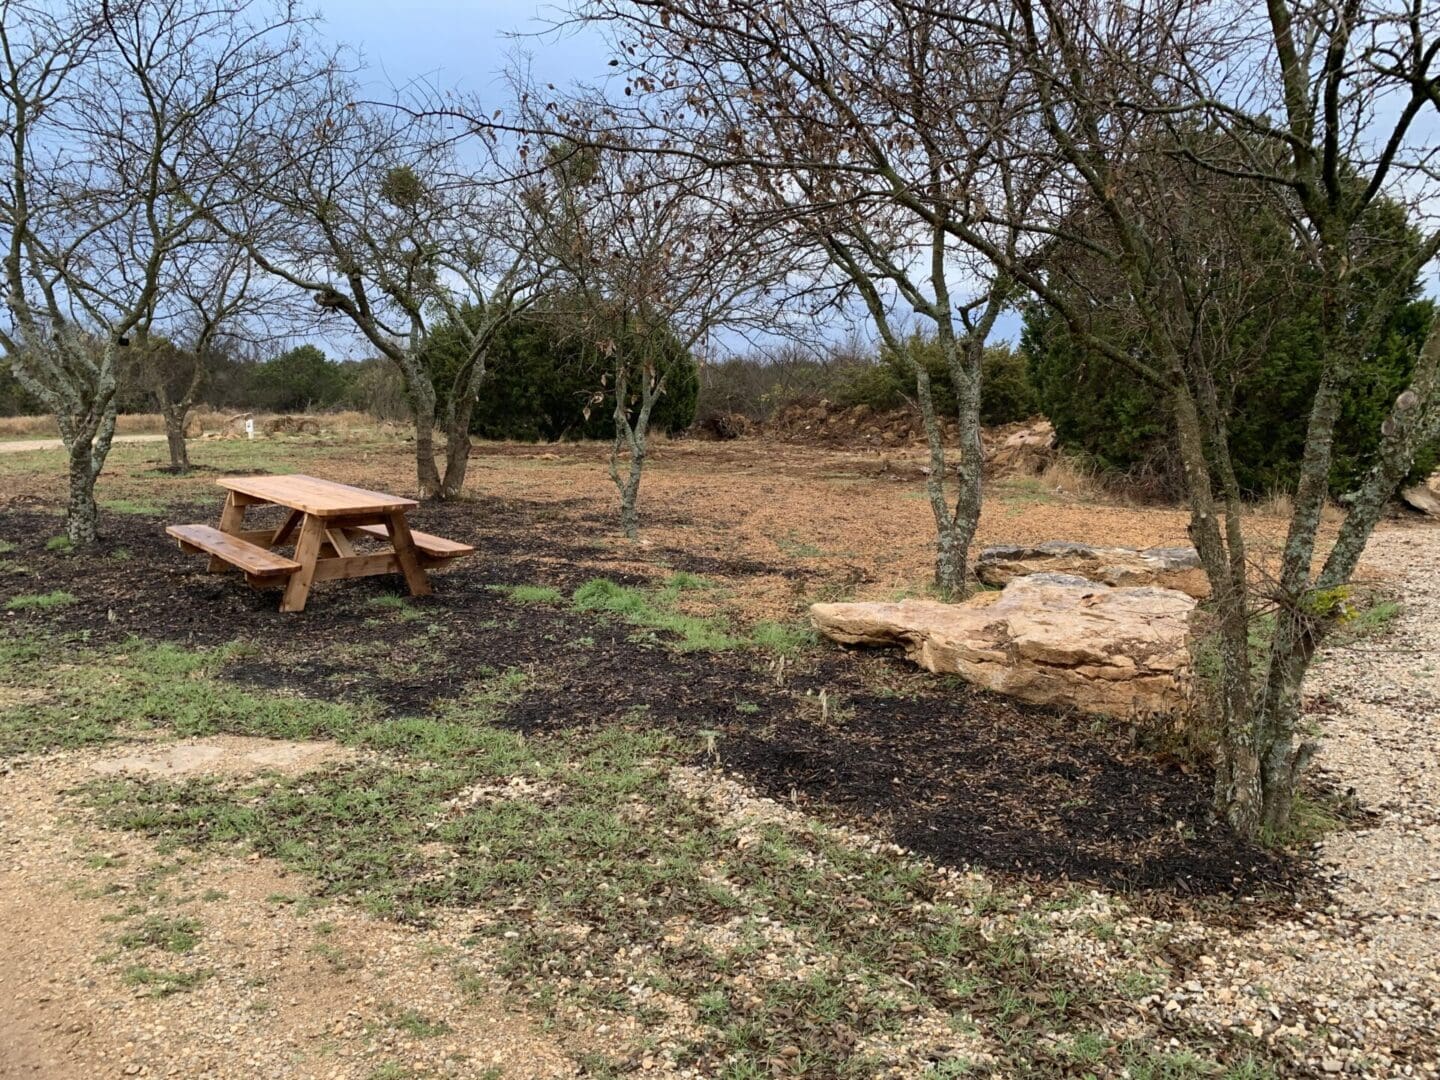 A wooden picnic table in the farm field